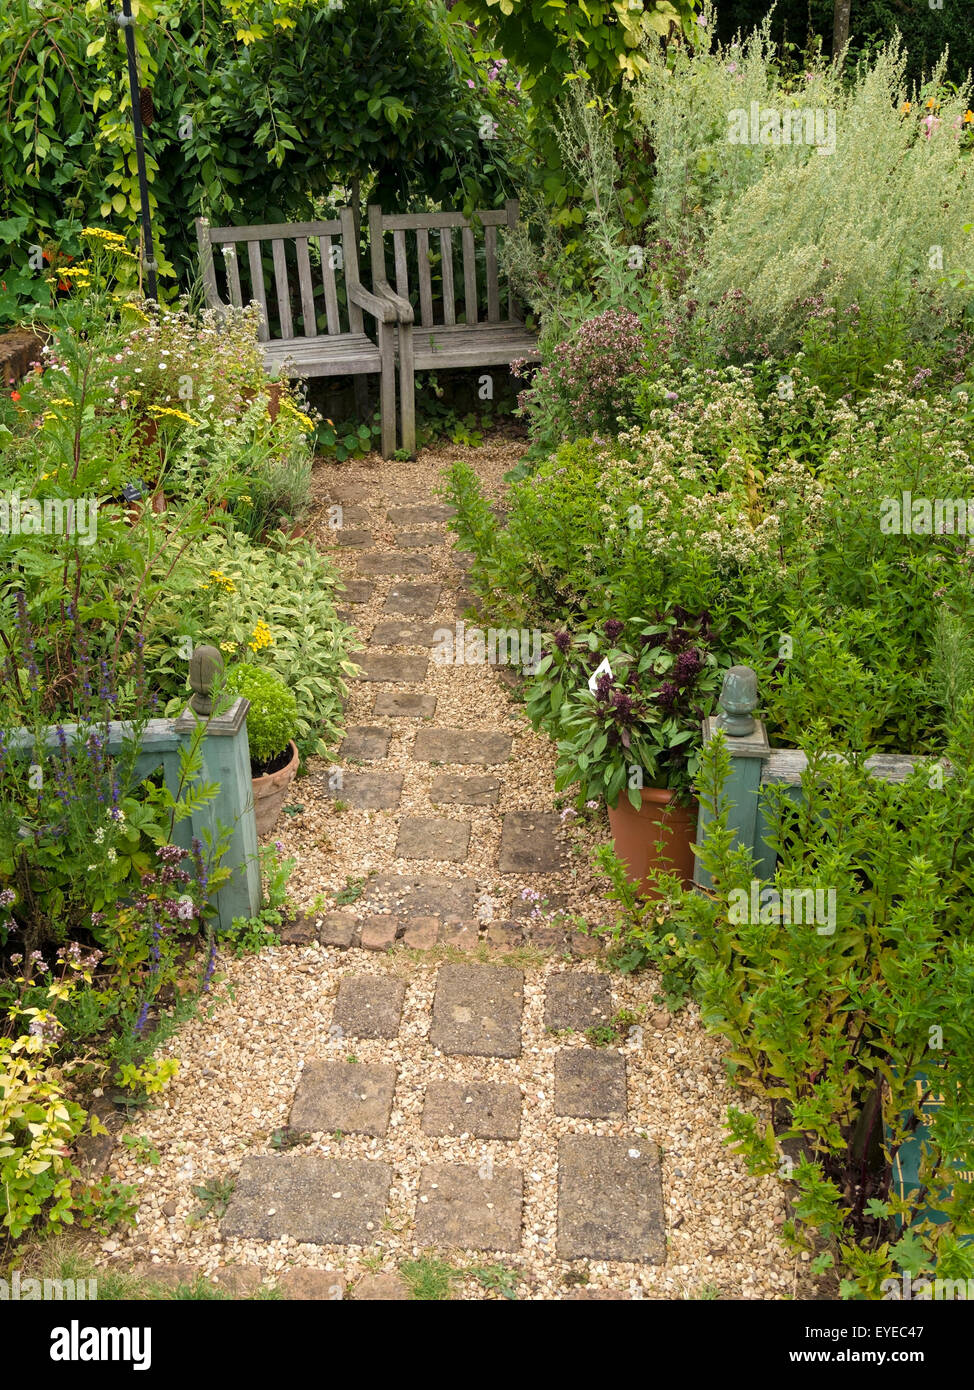 Small English cottage garden with paved and gravel path, borders and wooden garden seats, Barnsdale Gardens, Rutland, England,UK Stock Photo